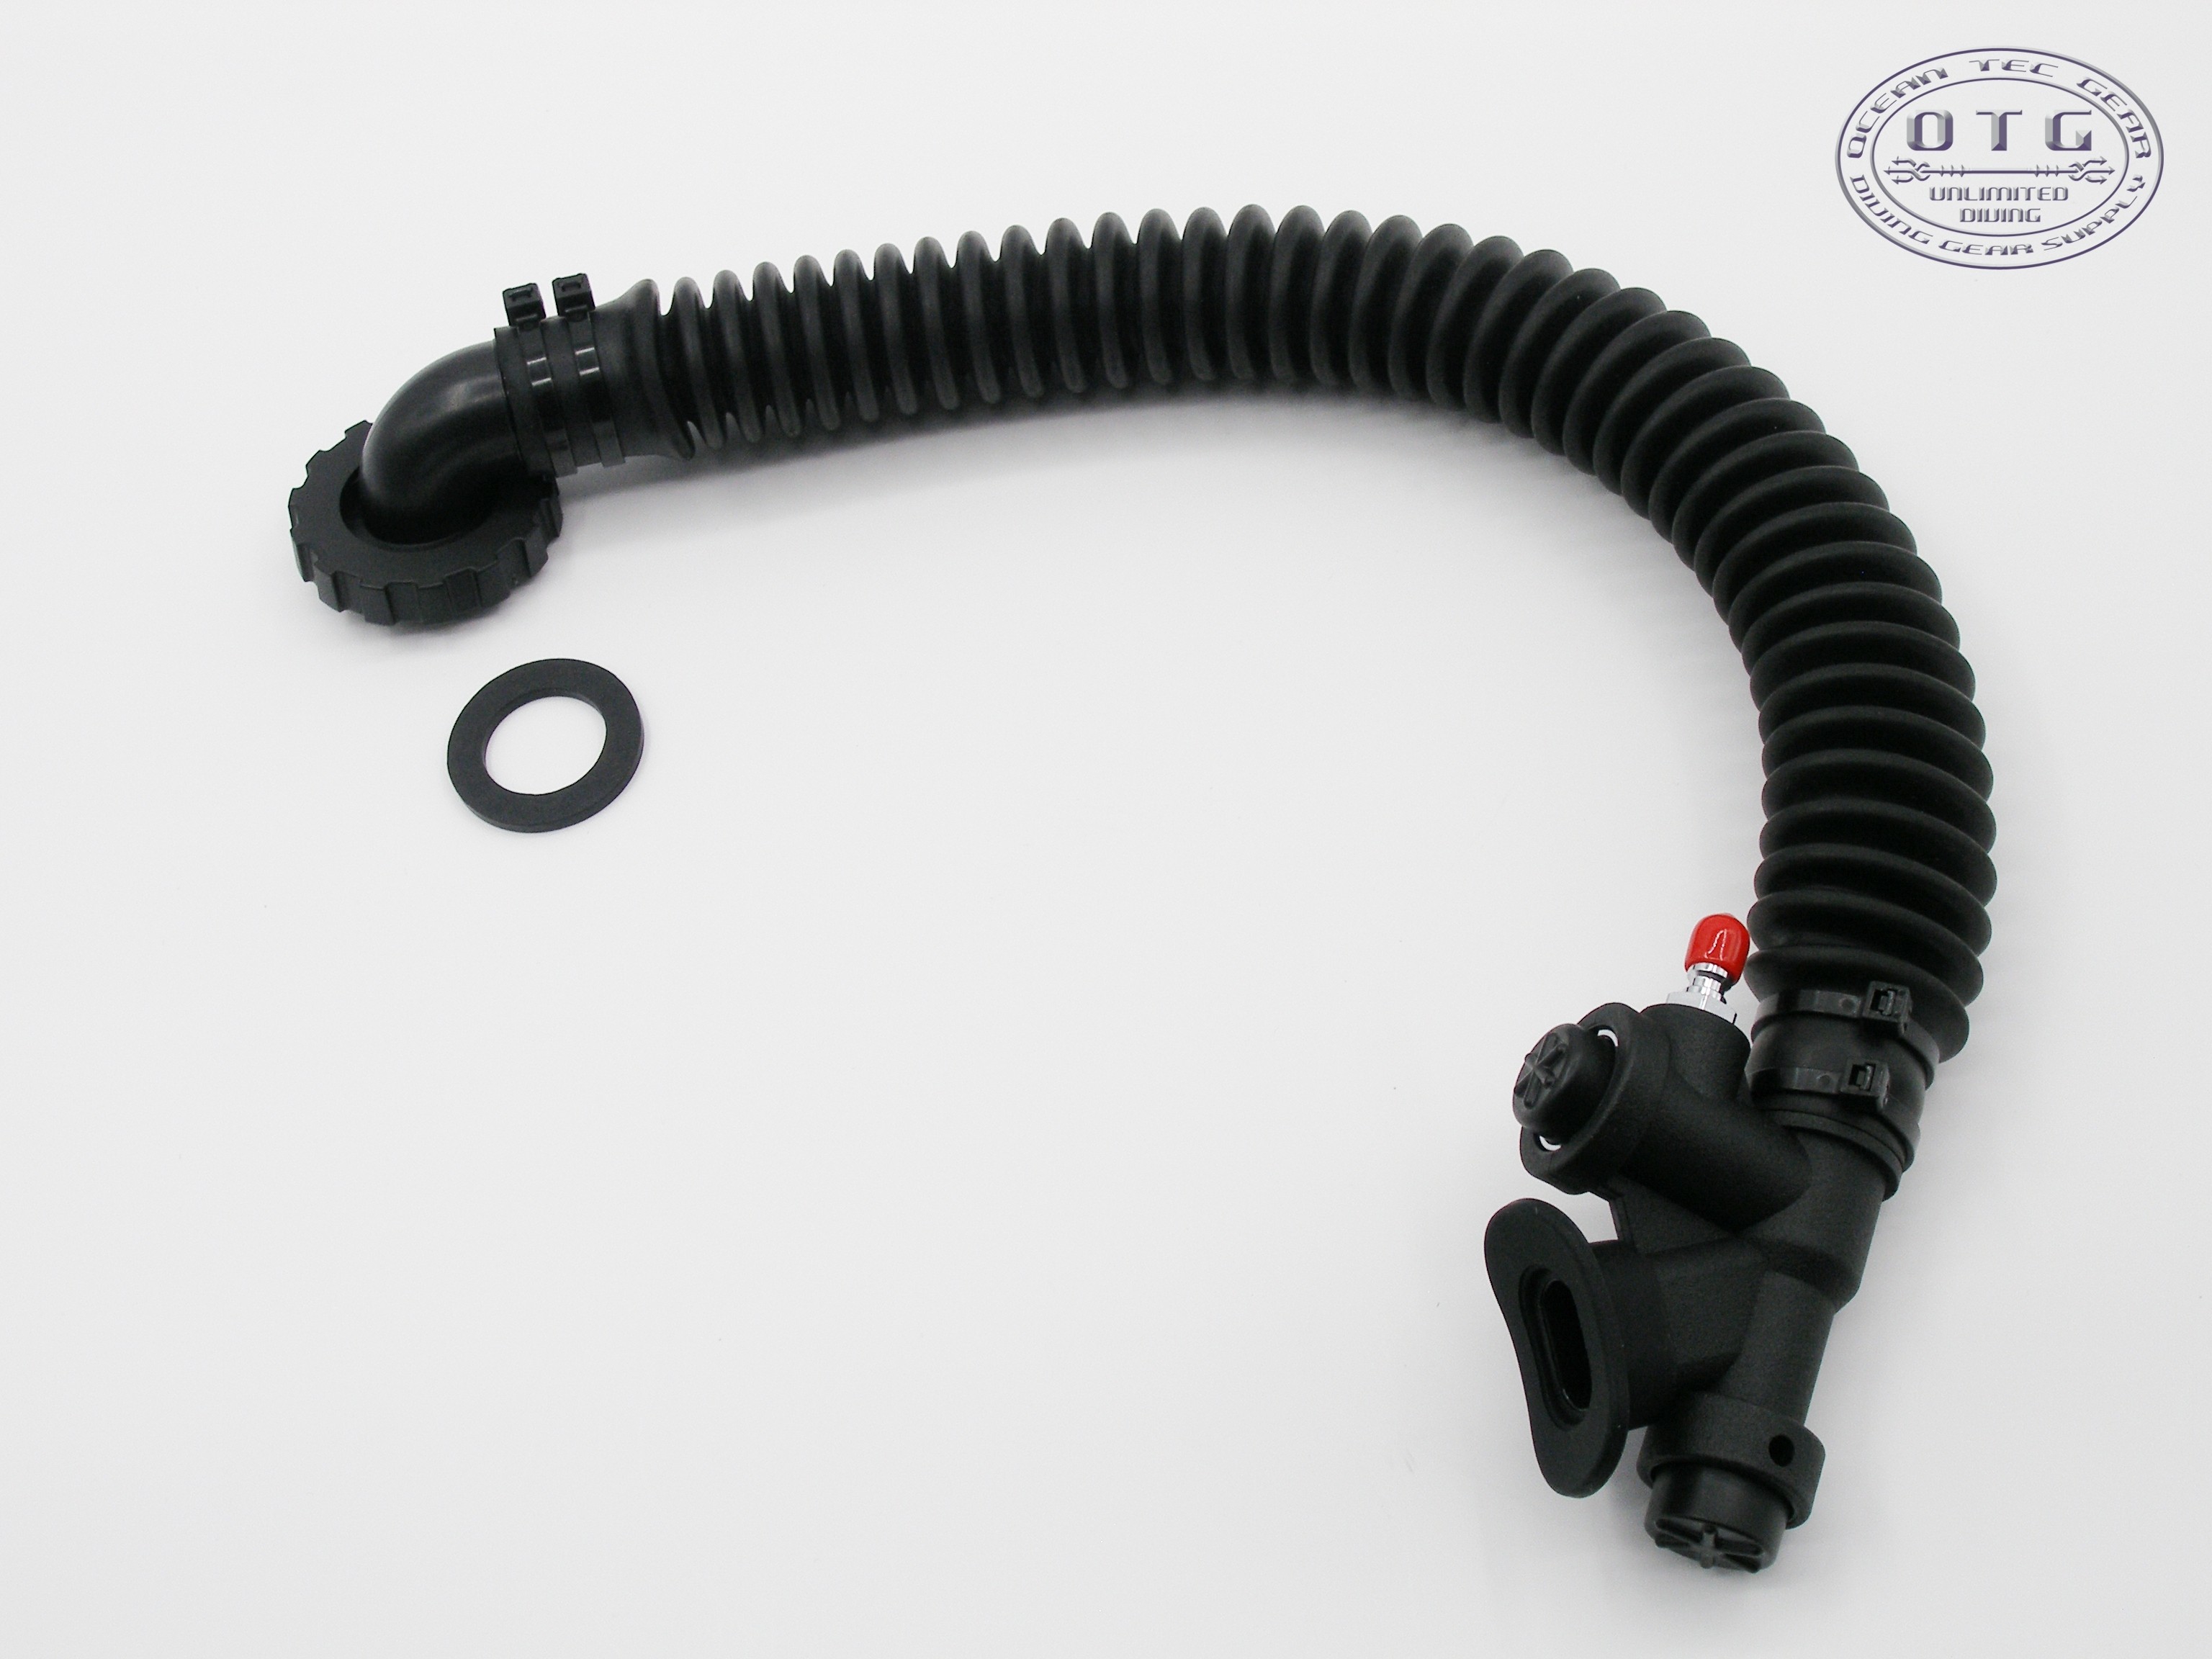 2 Details about   Pair of 13" Corrugated Scuba BCD Airway Inflator Hoses Sherwood Genesis New! 